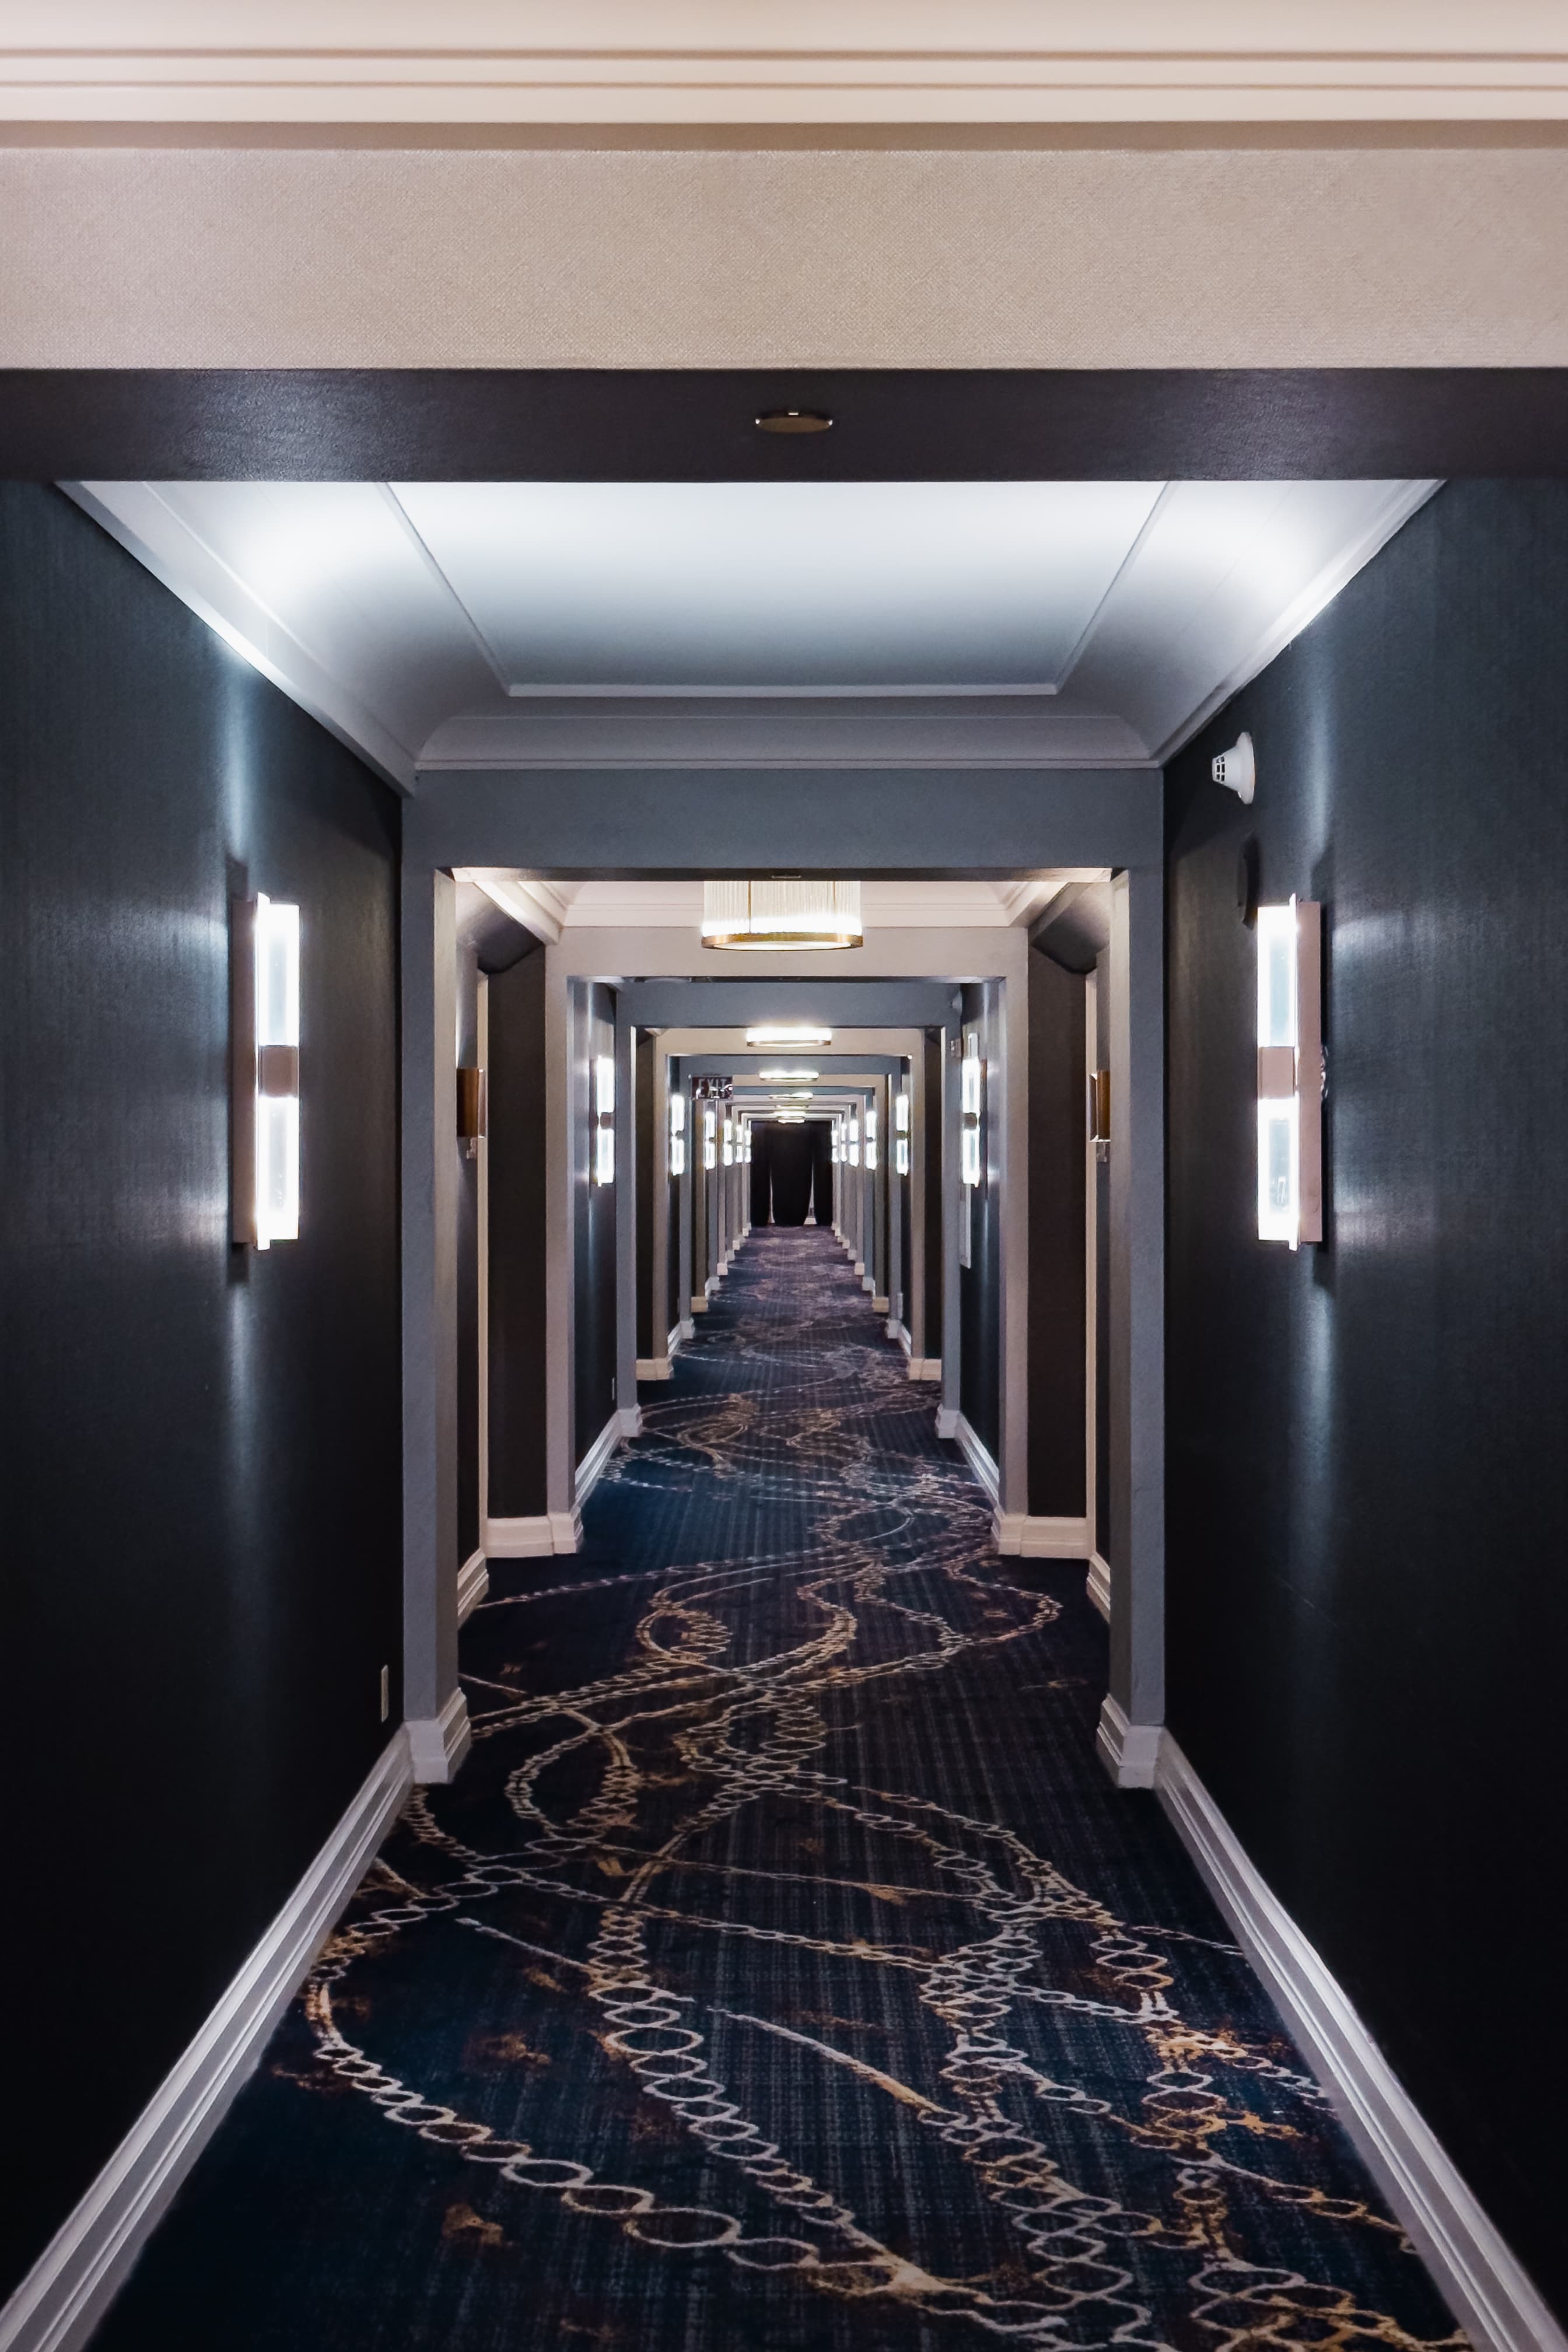 A long, symmetrical hotel corridor with decorative carpet, framed by dark walls and lit by ceiling lights, creating a perspective leading to a vanishing point.